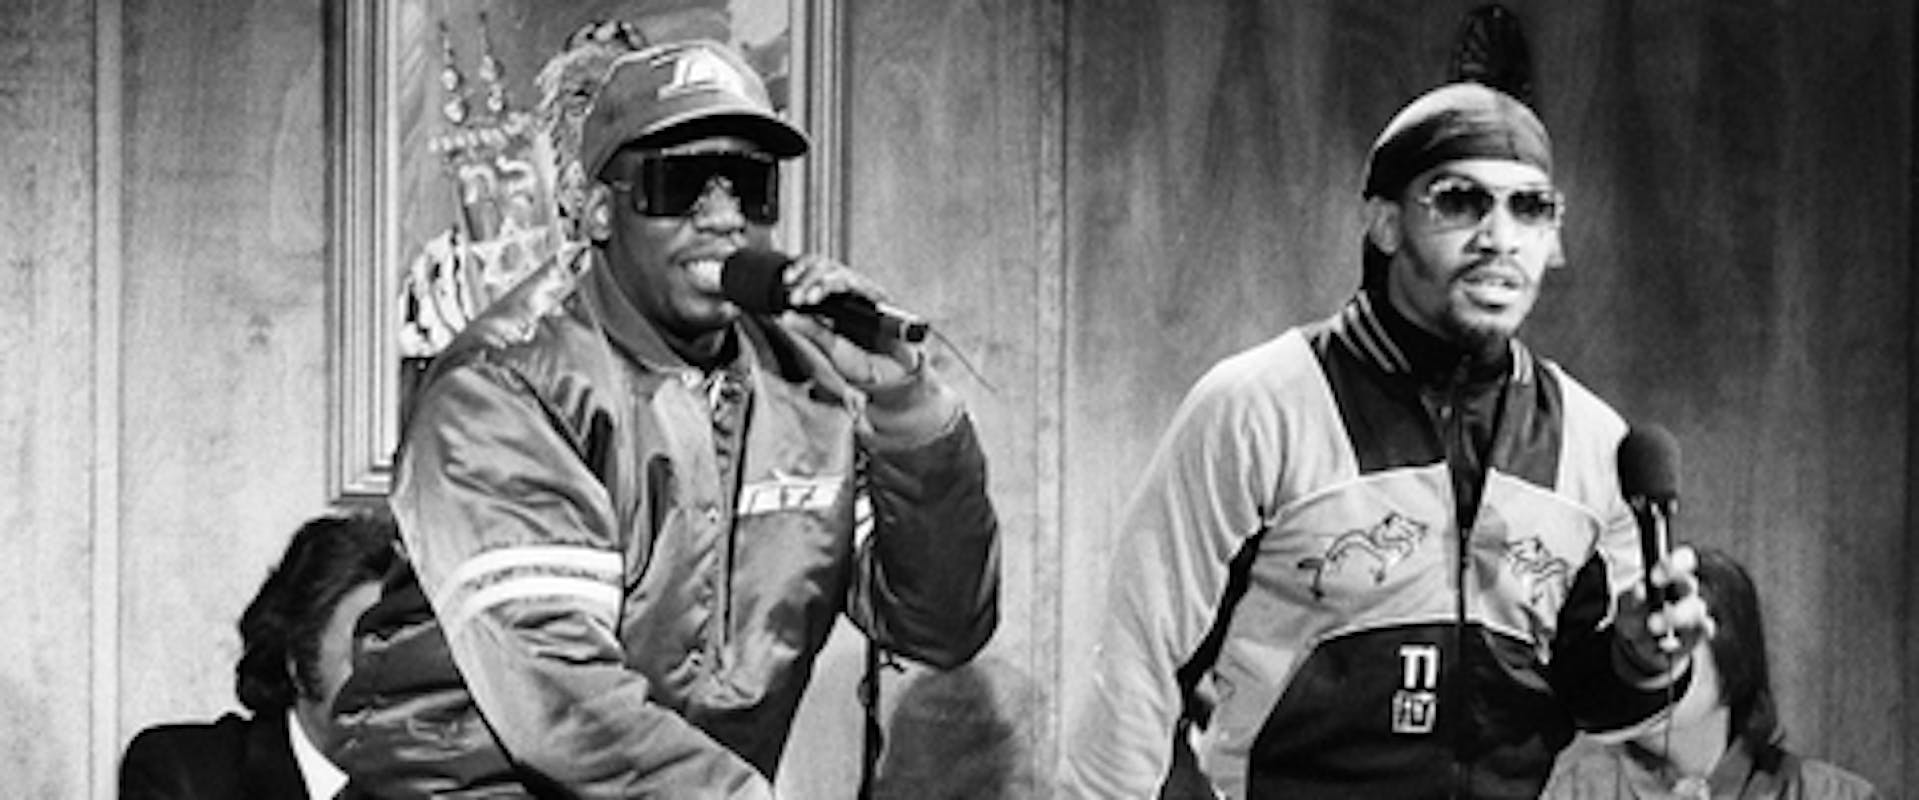 SATURDAY NIGHT LIVE -- Episode 12 -- Pictured: (l-r) Quincy Jones as Reverend James Walker, and Kool Moe Dee & Melle Mel as Raf-San Cool MC during "Crown Heights" skit on February 10, 1990 